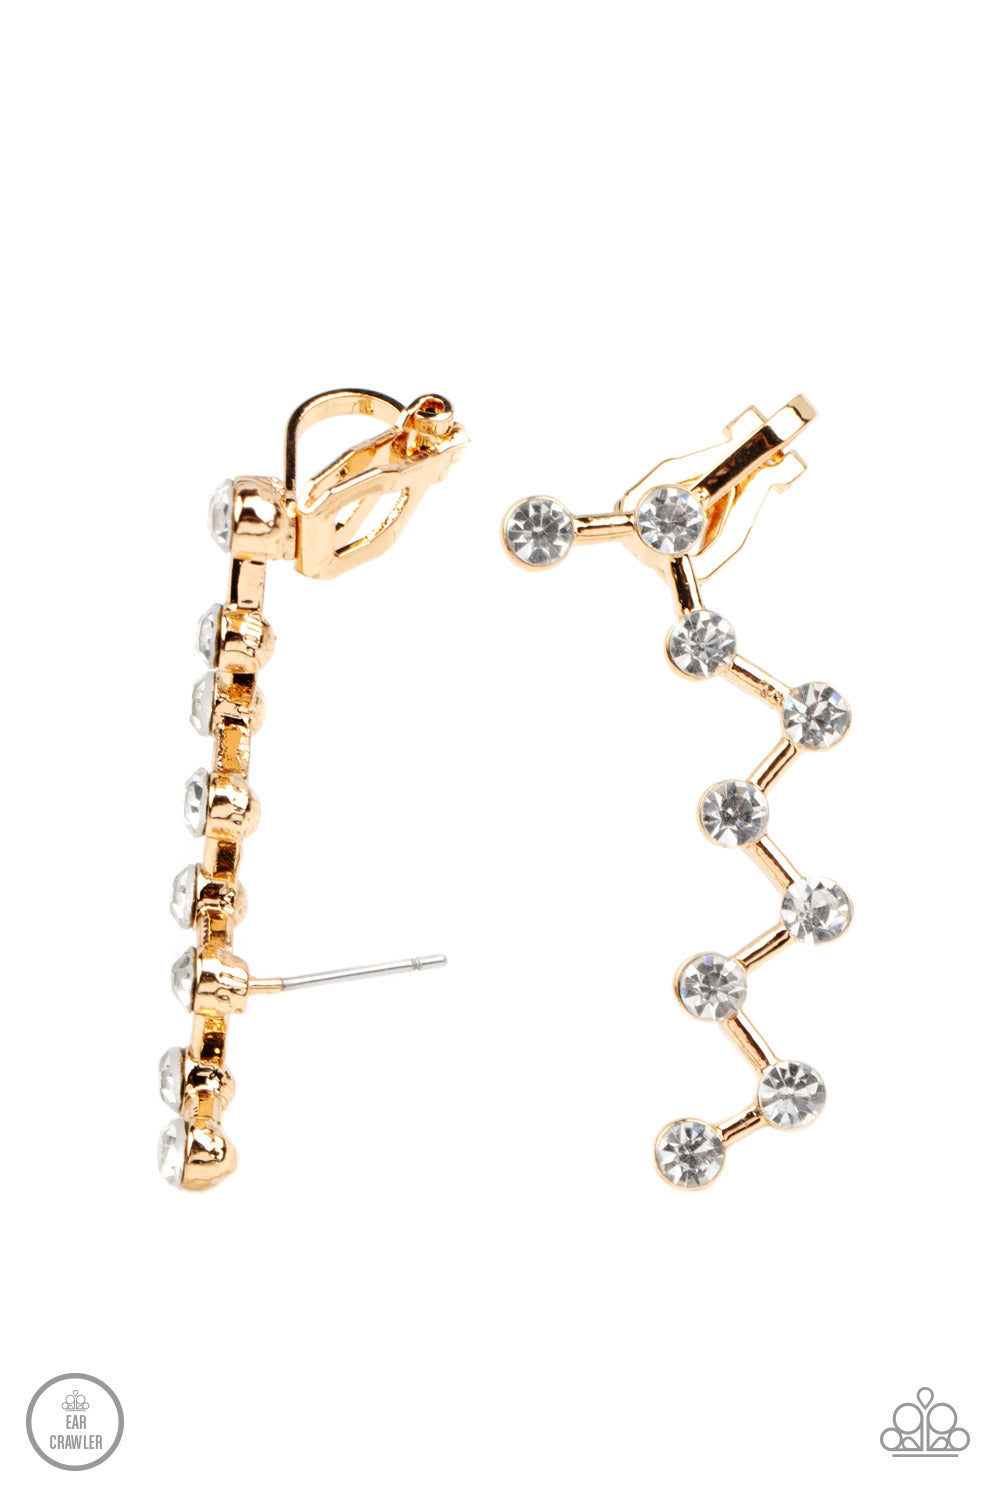 Clamoring Constellations - gold - Paparazzi earrings